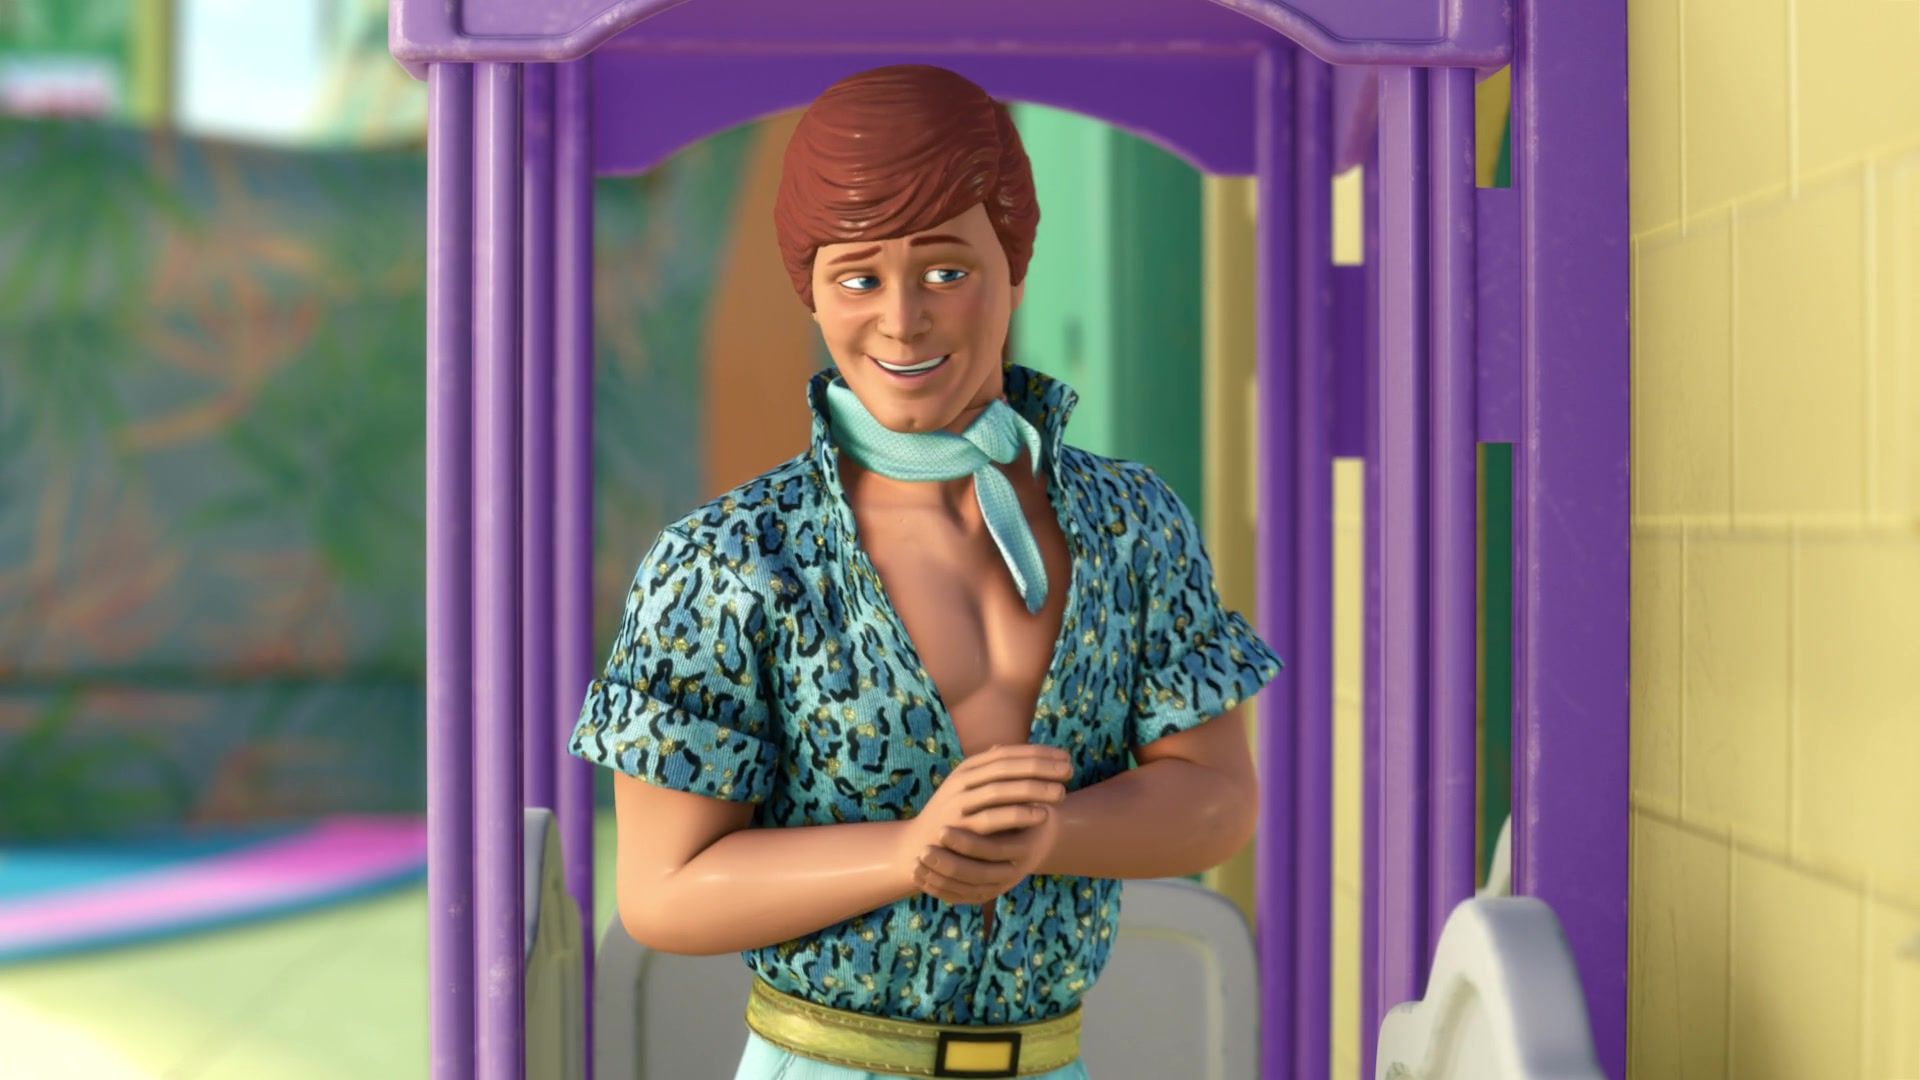 Toy Story - Ken you dig it?